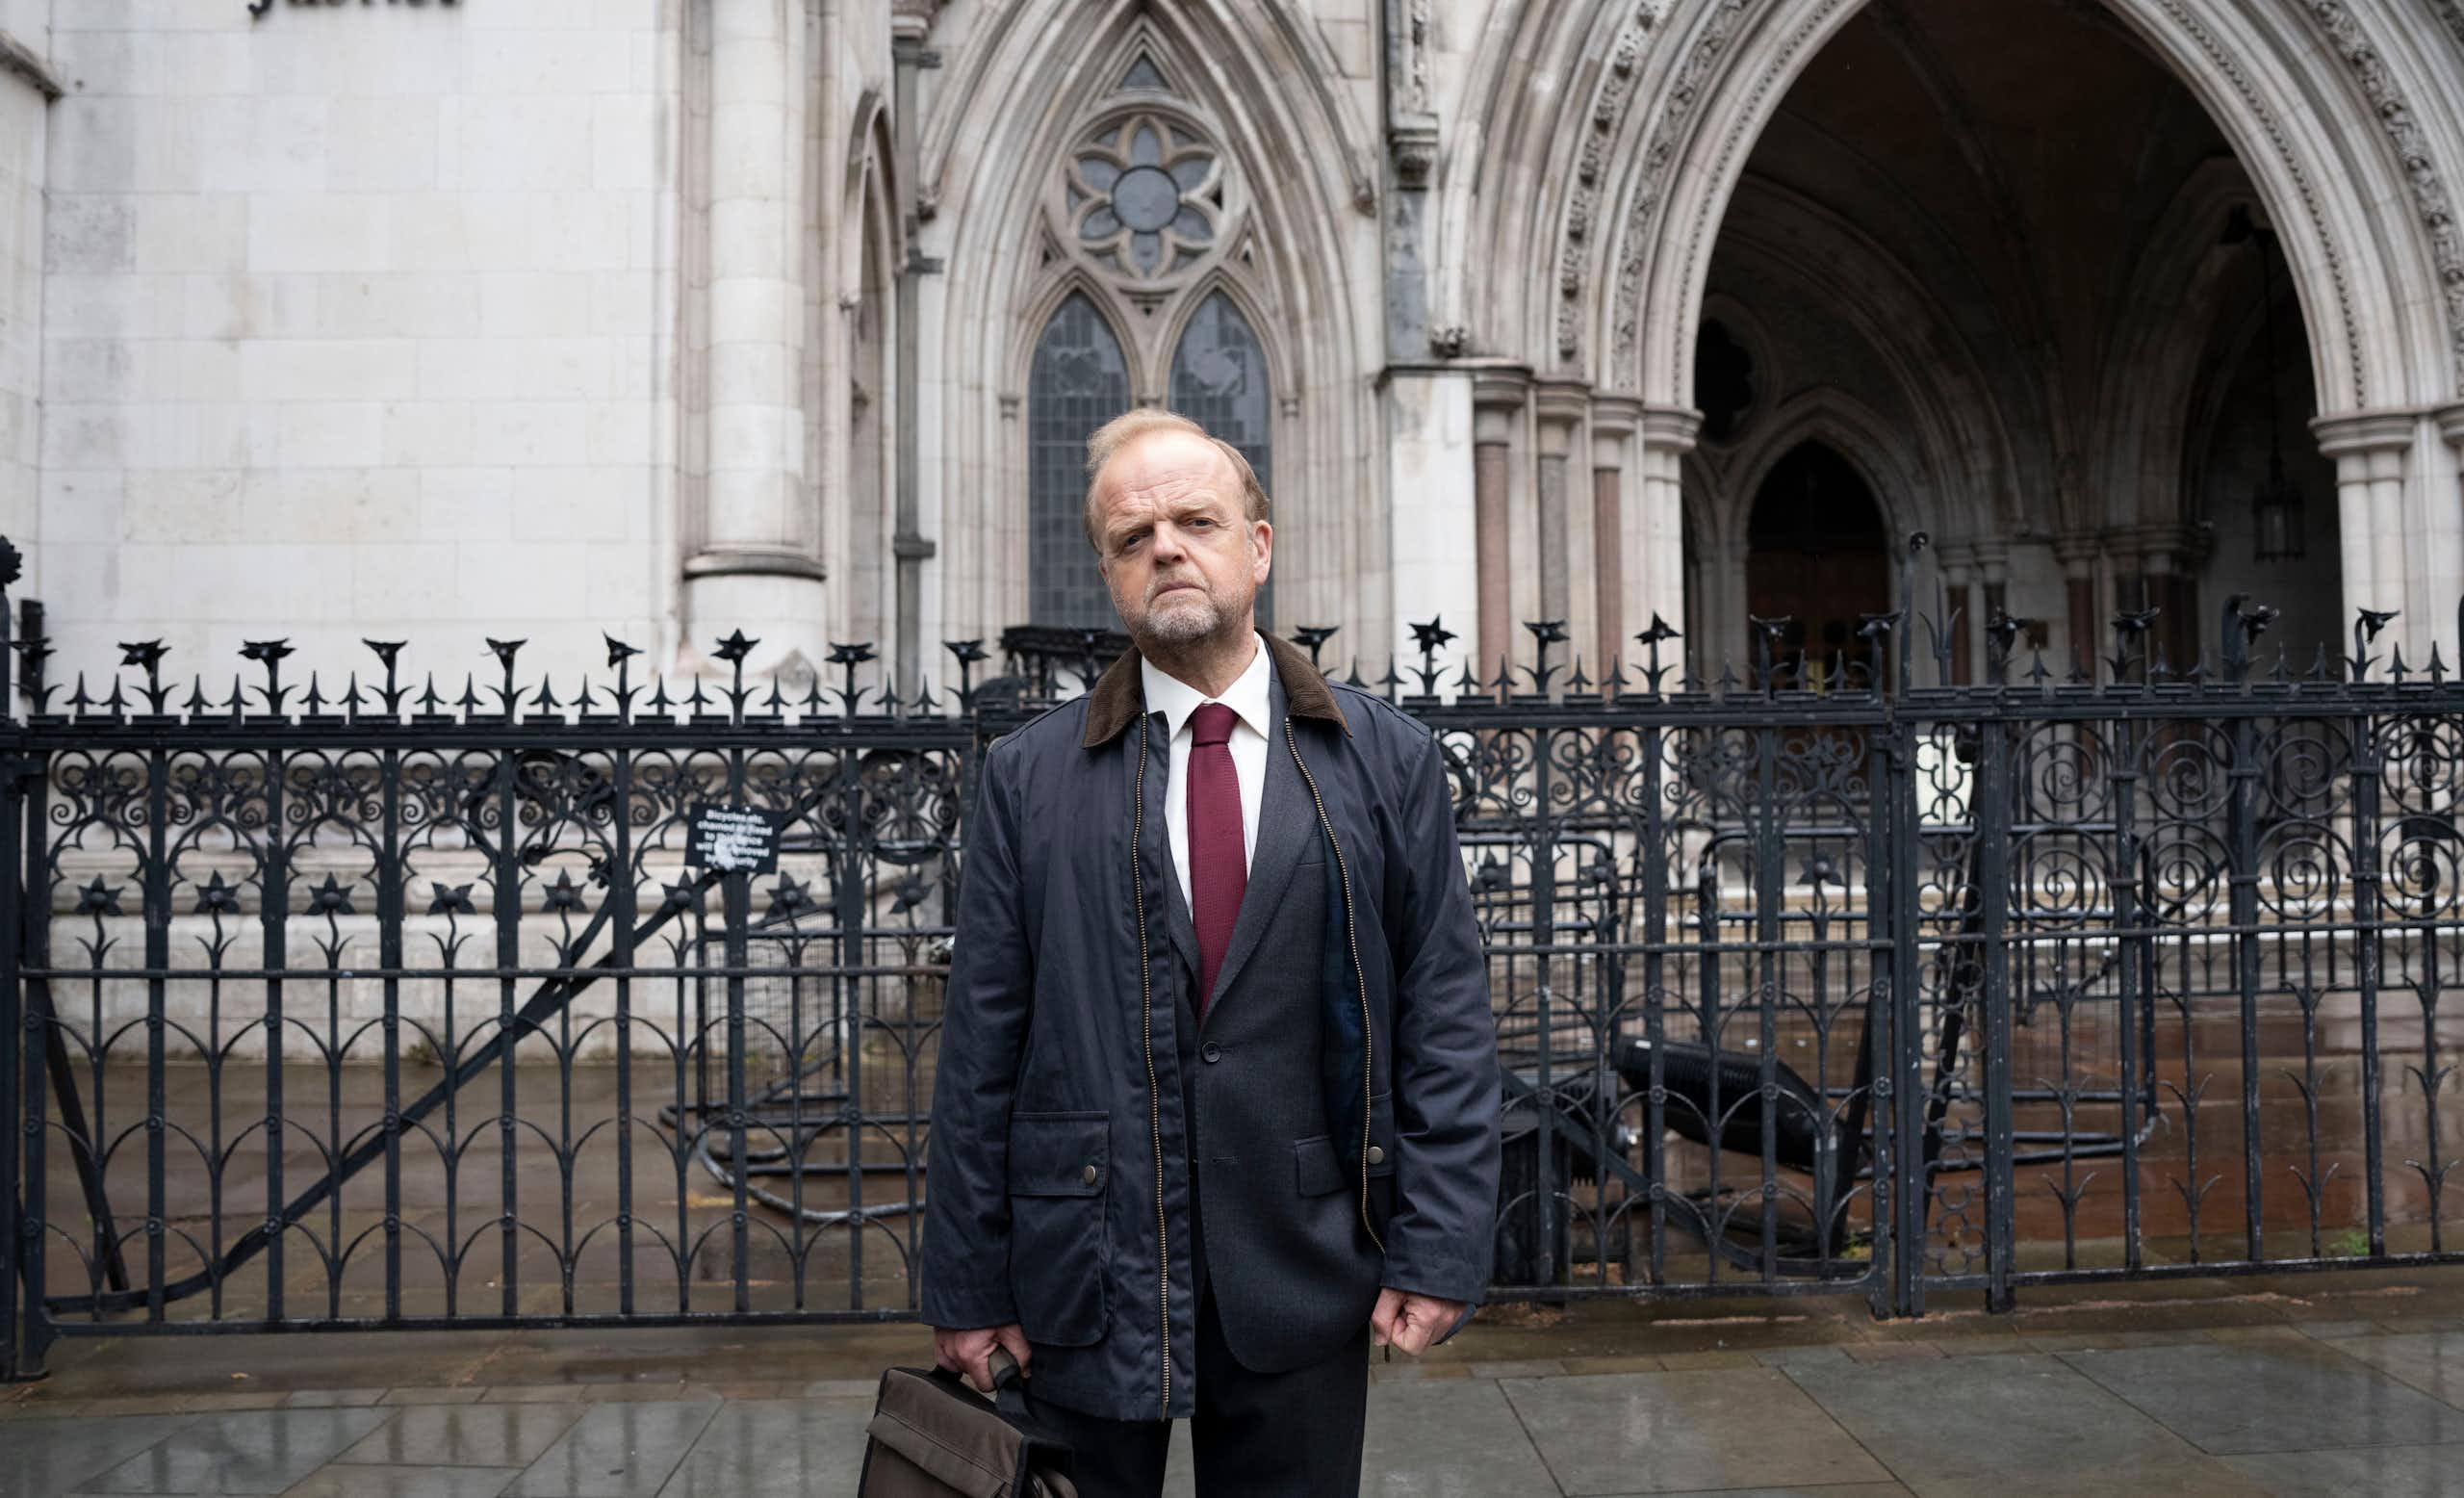 Man stands outside a court holding a suit case.